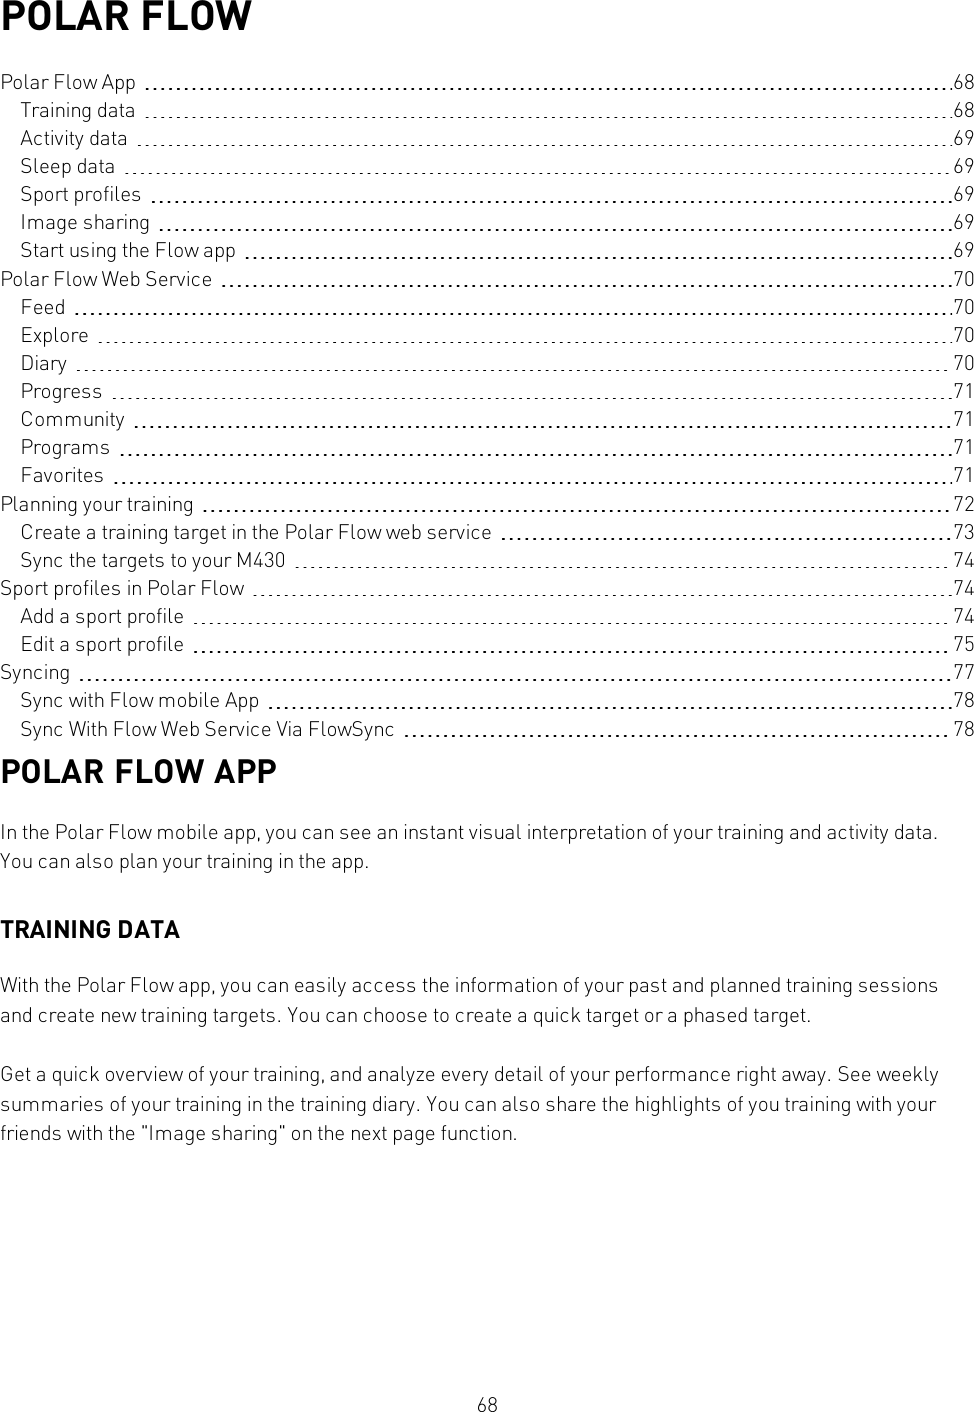 68POLAR FLOWPolar Flow App 68Training data 68Activity data 69Sleep data 69Sport profiles 69Image sharing 69Start using the Flow app 69Polar Flow Web Service 70Feed 70Explore 70Diary 70Progress 71Community 71Programs 71Favorites 71Planning your training 72Create a training target in the Polar Flow web service 73Sync the targets to your M430 74Sport profiles in Polar Flow 74Add a sport profile 74Edit a sport profile 75Syncing 77Sync with Flow mobile App 78Sync With Flow Web Service Via FlowSync 78POLAR FLOW APPIn the Polar Flow mobile app, you can see an instant visual interpretation of your training and activity data.You can also plan your training in the app.TRAINING DATAWith the Polar Flow app, you can easily access the information of your past and planned training sessionsand create new training targets. You can choose to create a quick target or a phased target.Get a quick overview of your training, and analyze every detail of your performance right away. See weeklysummaries of your training in the training diary. You can also share the highlights of you training with yourfriends with the &quot;Image sharing&quot; on the next page function.